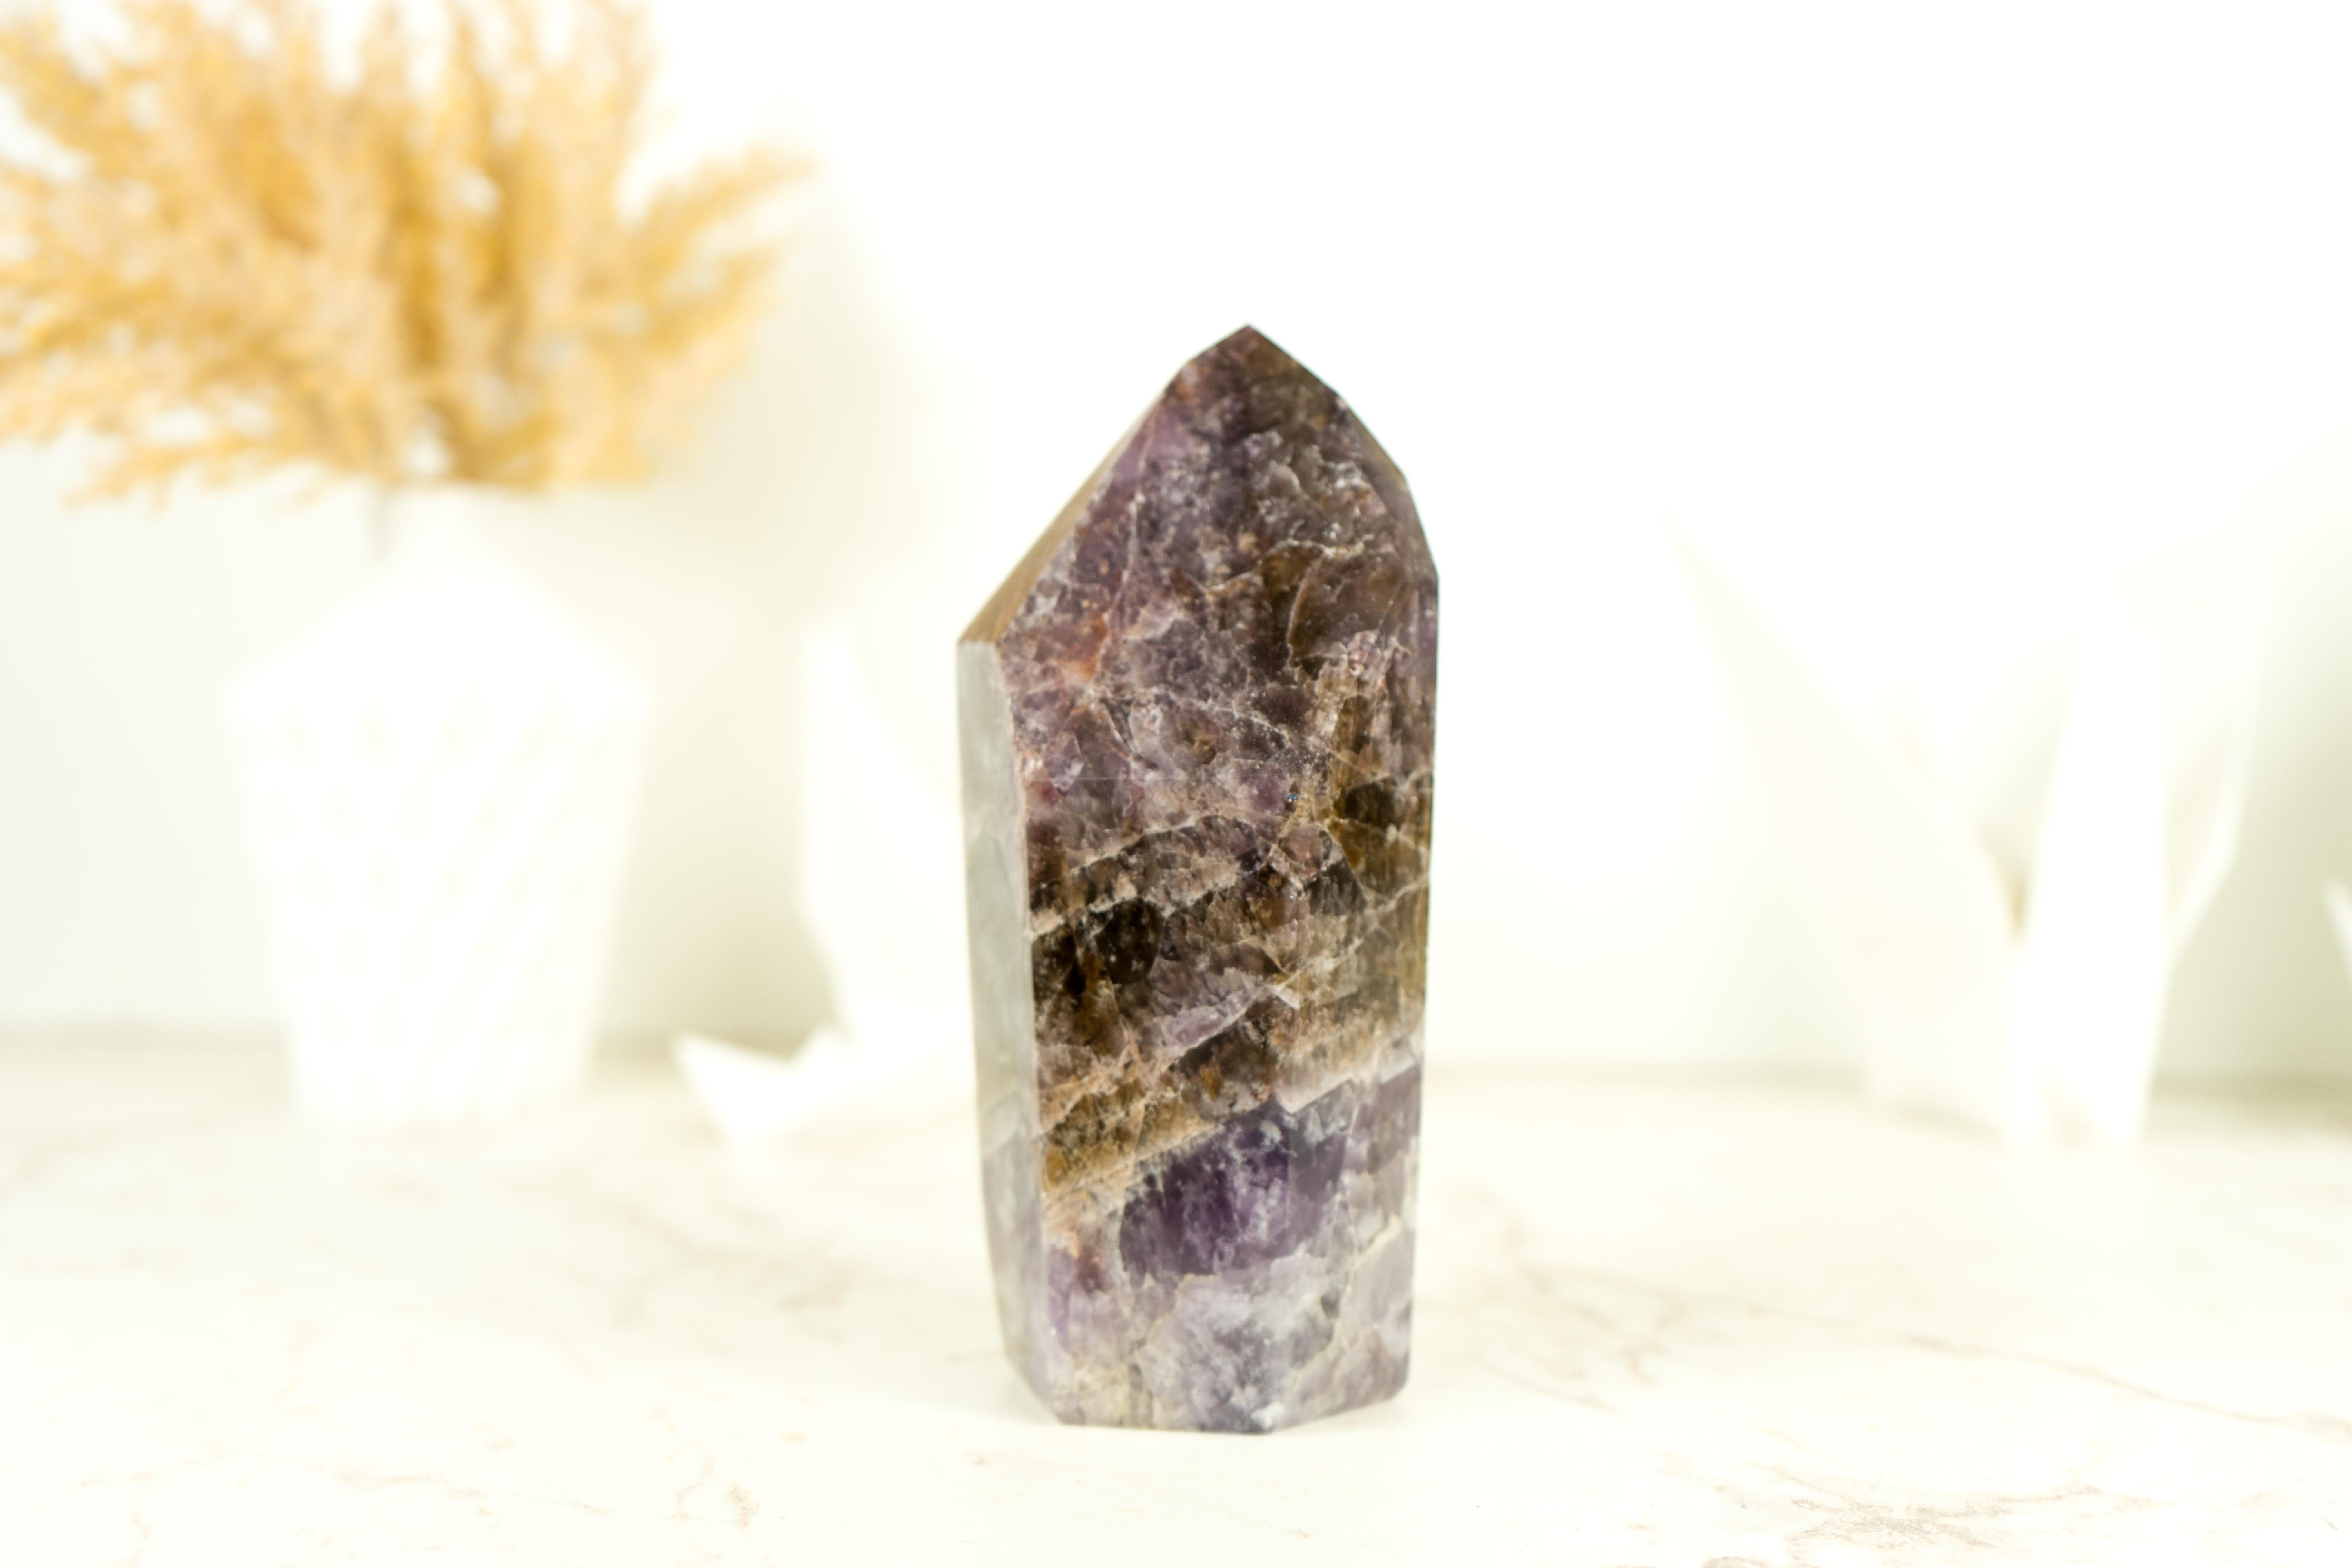 A Large Super Seven Scepter Generator, this self-standing point is a remarkable specimen that showcases both impressive size and unique characteristics. This Super 7 crystal is not only a natural wonder but also a desirable addition to any